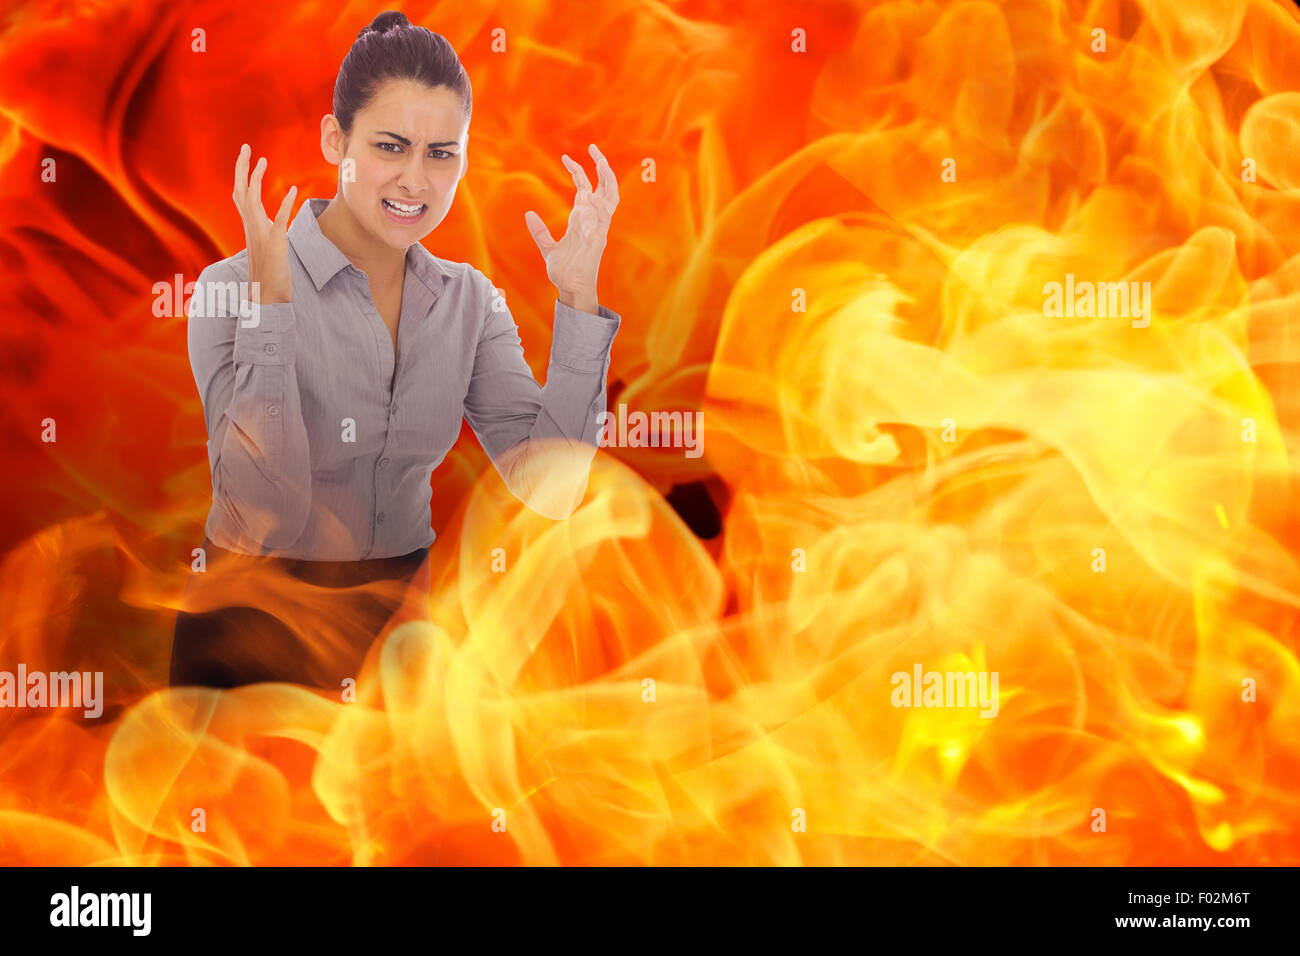 Composite image of frustrated businesswoman shouting Stock Photo